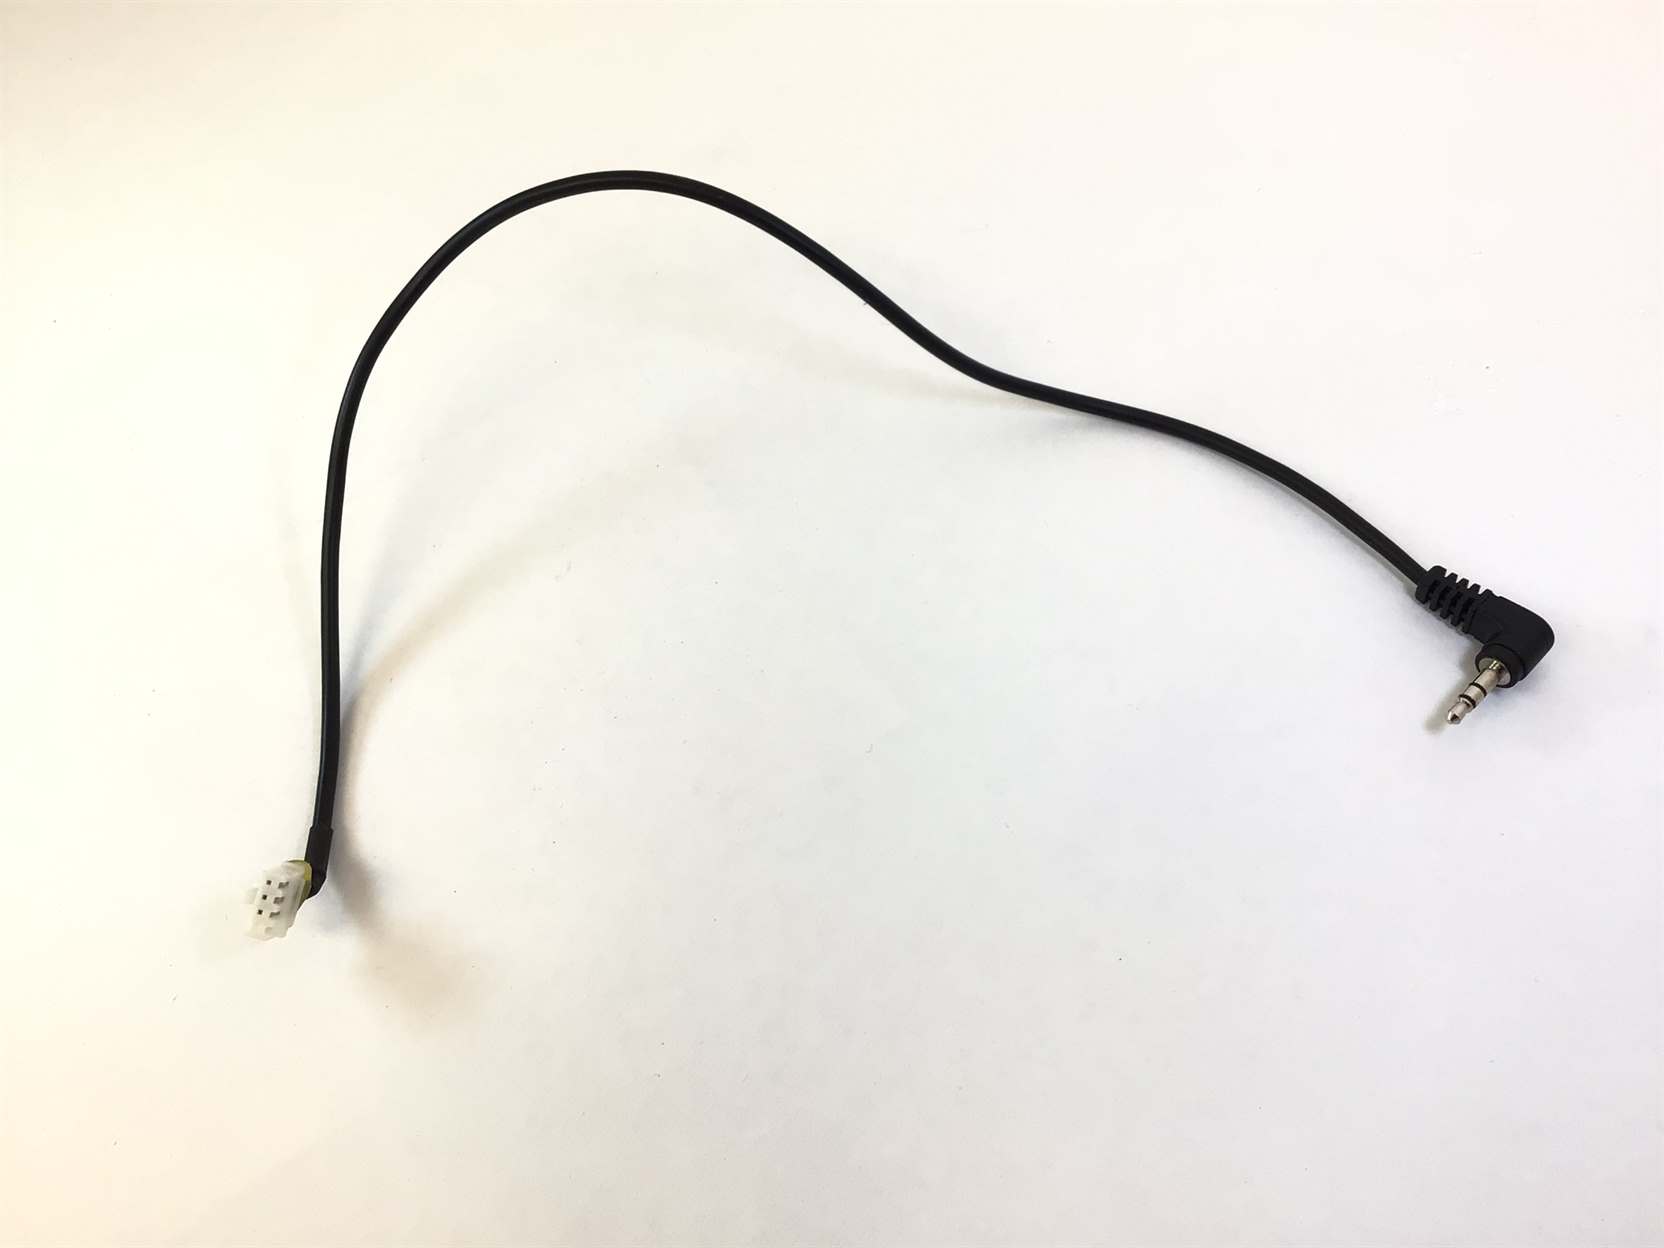 Speaker Wire 3.5 mm to Connector (Used)